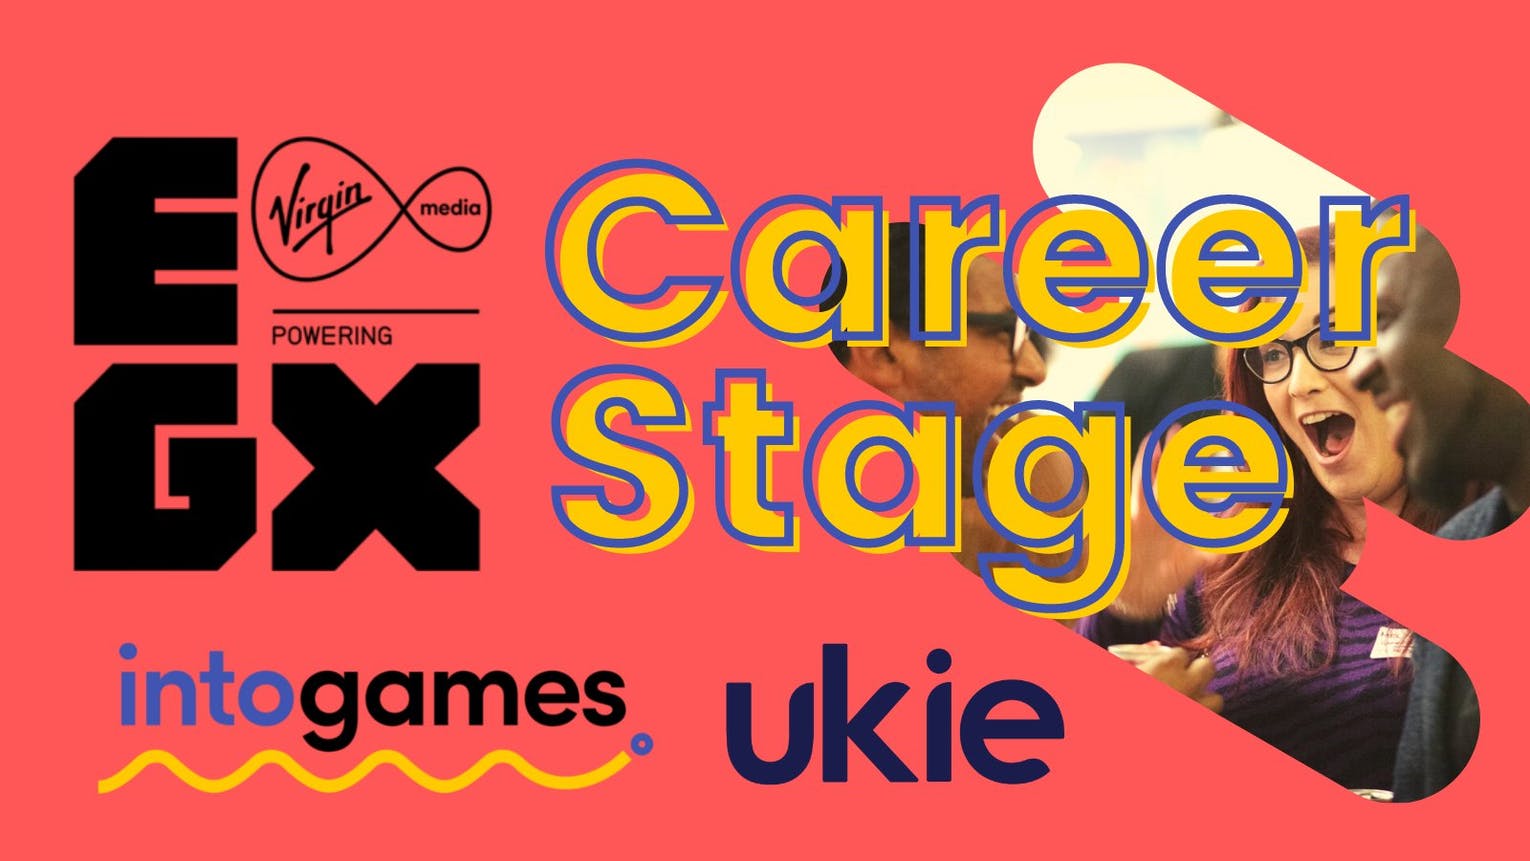 Image for EGX Career Stage 2021 full schedule revealed